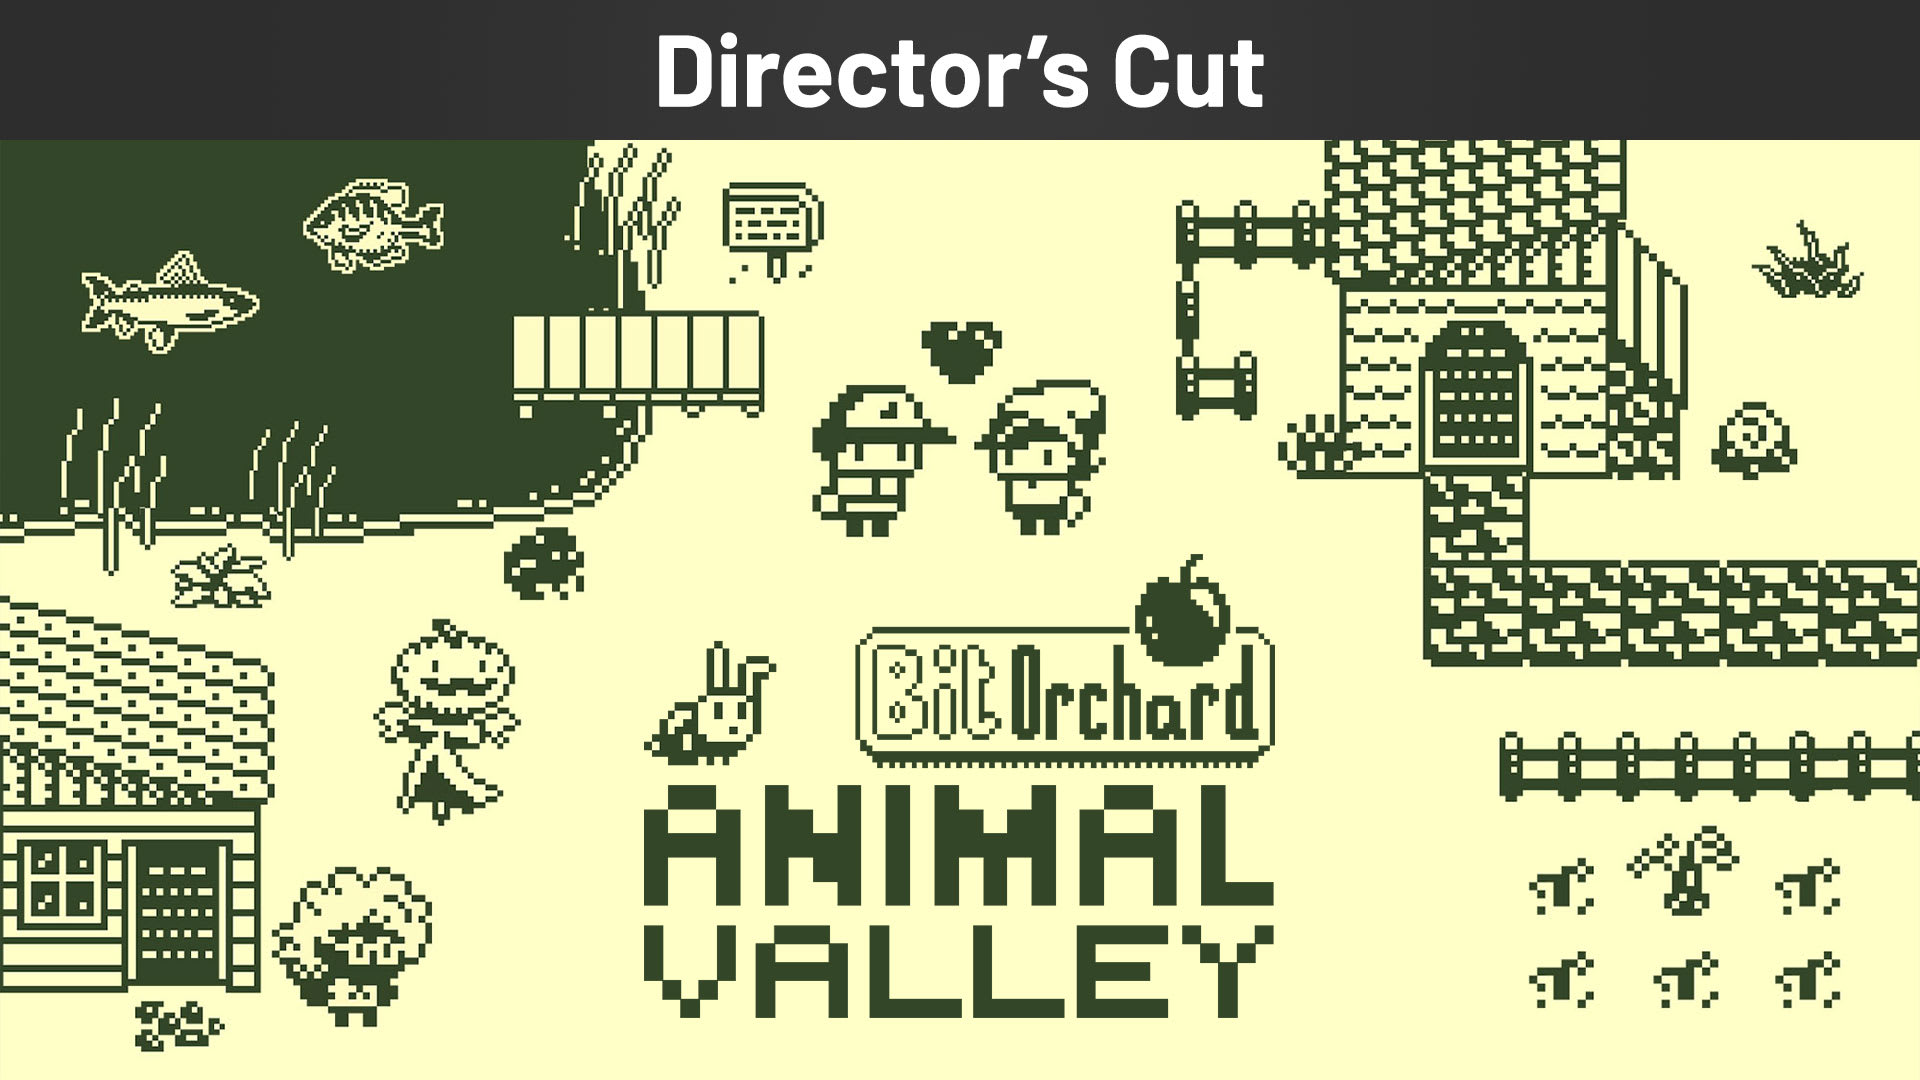 Bit Orchard: Animal Valley Director's Cut